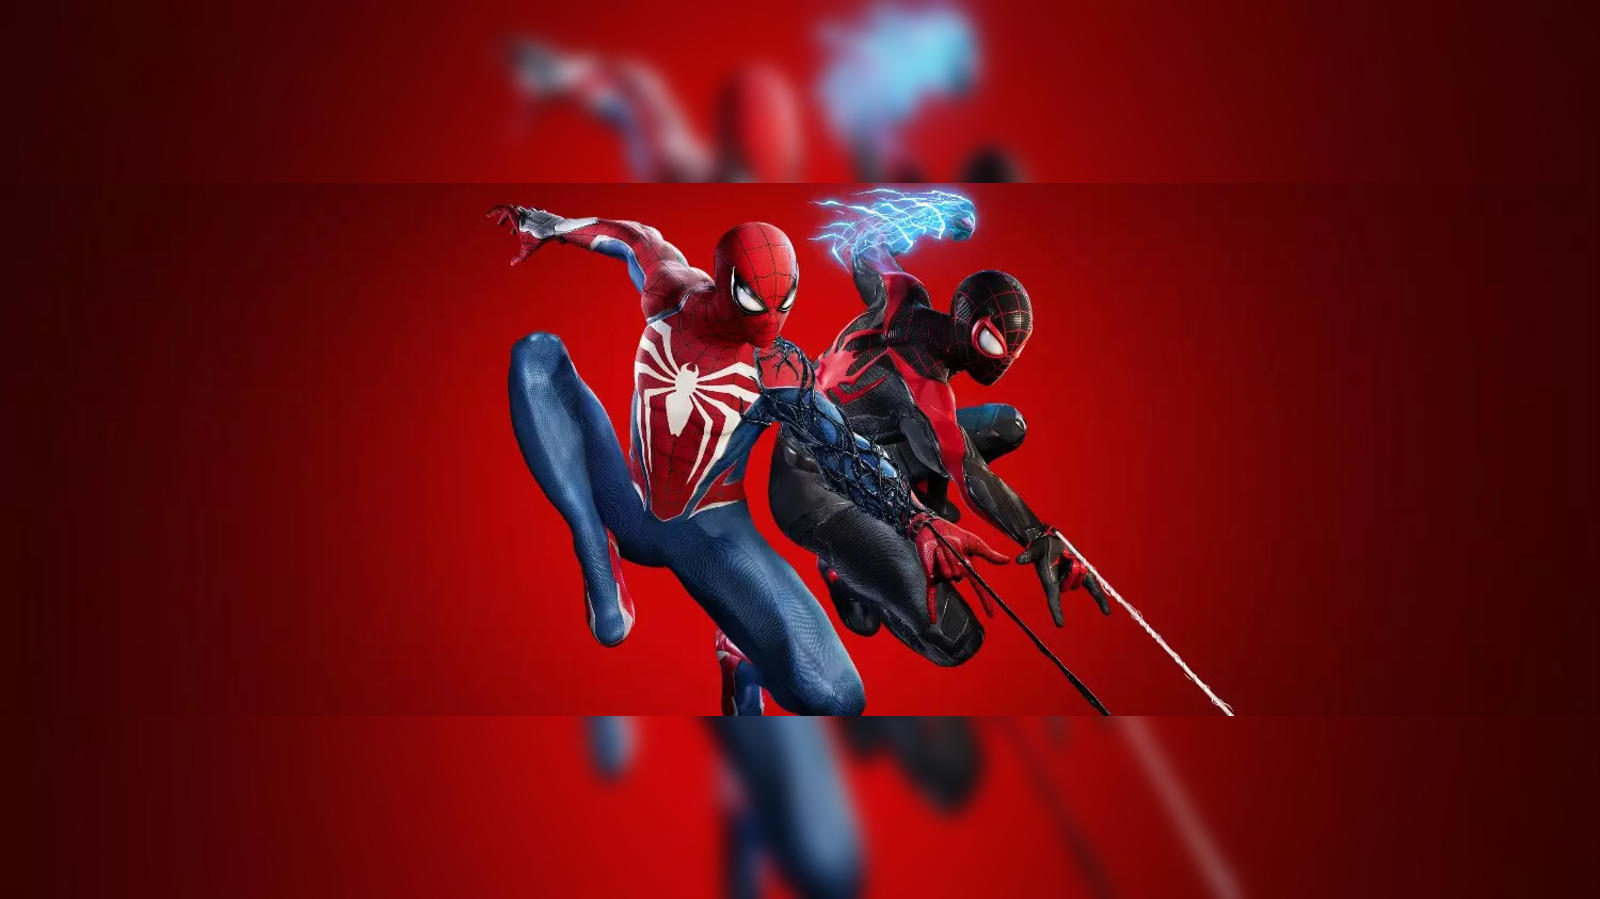 Marvel's Spider-Man 2 Update 1.001.004 Patch Notes: Know Various Fixes and  Improvements - News